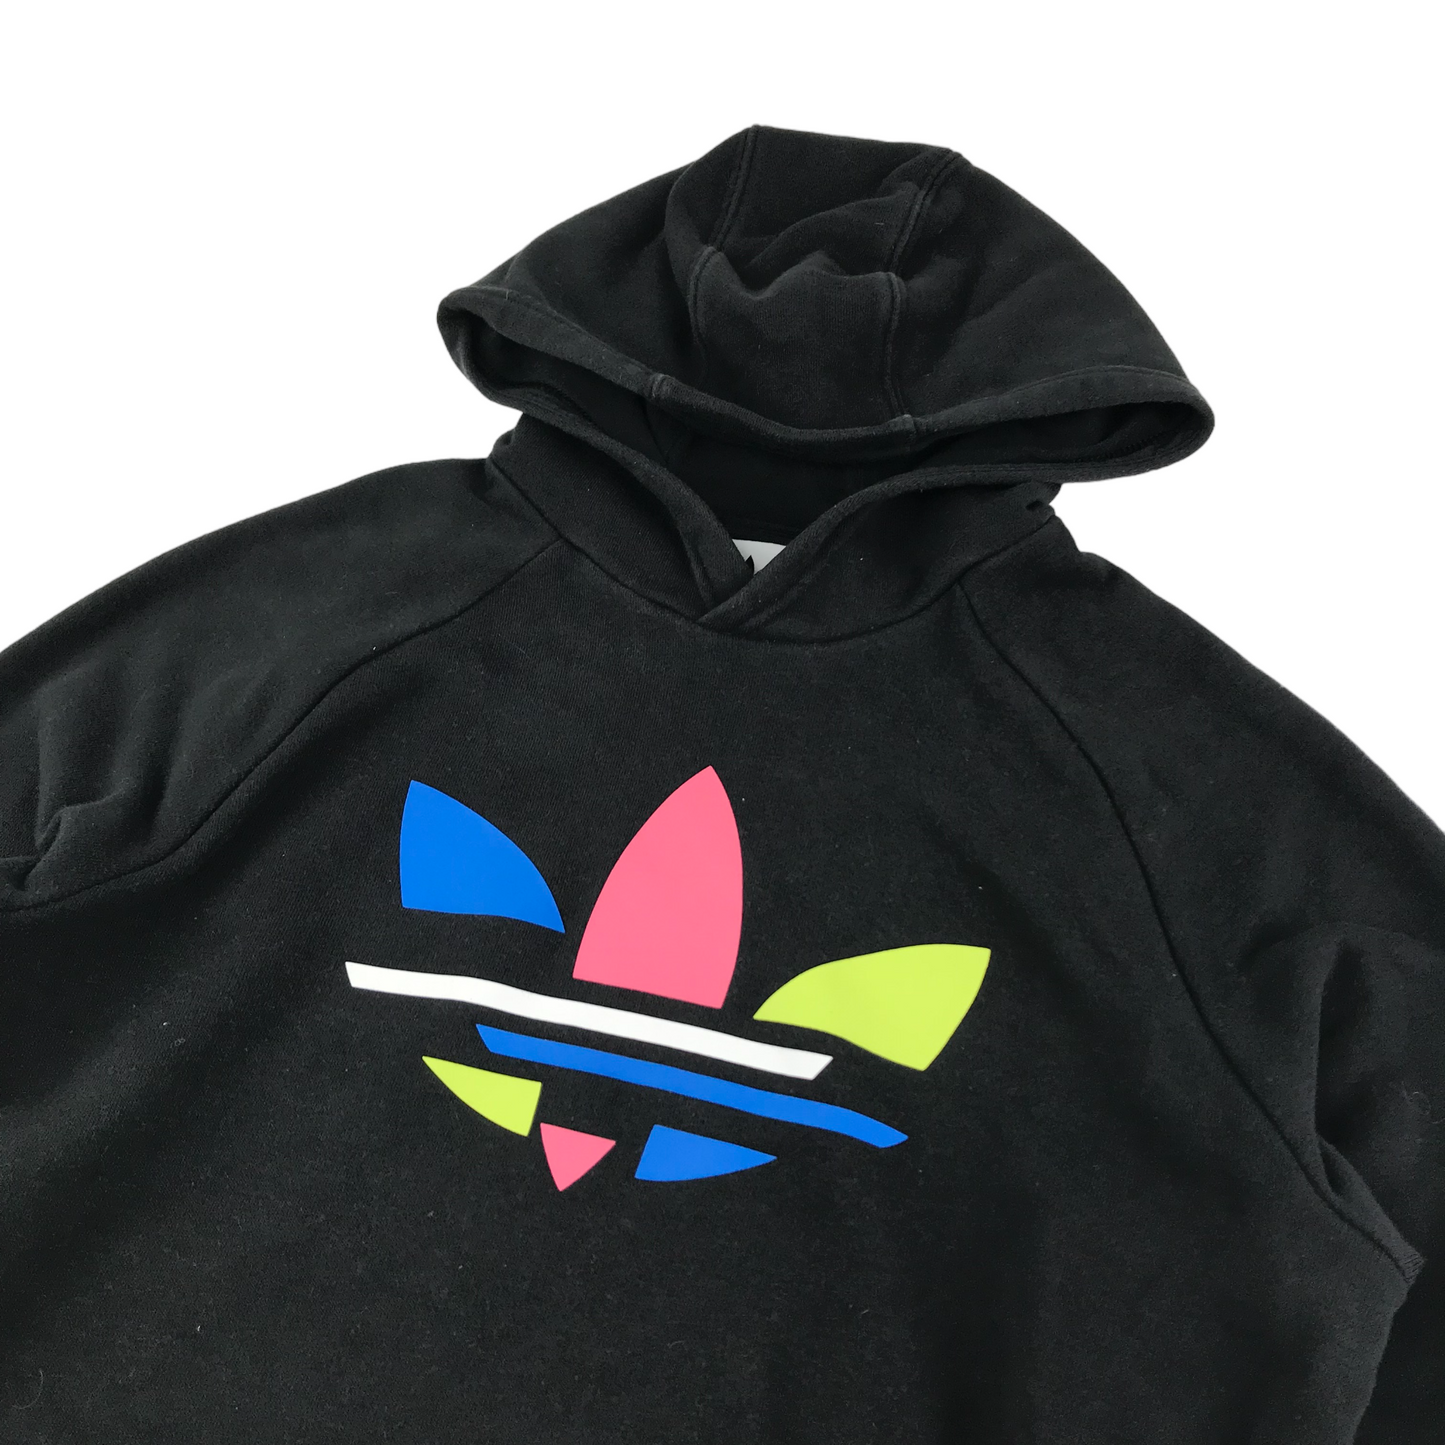 Adidas Hoodie Age 13 Black Colourful Logo Pullover